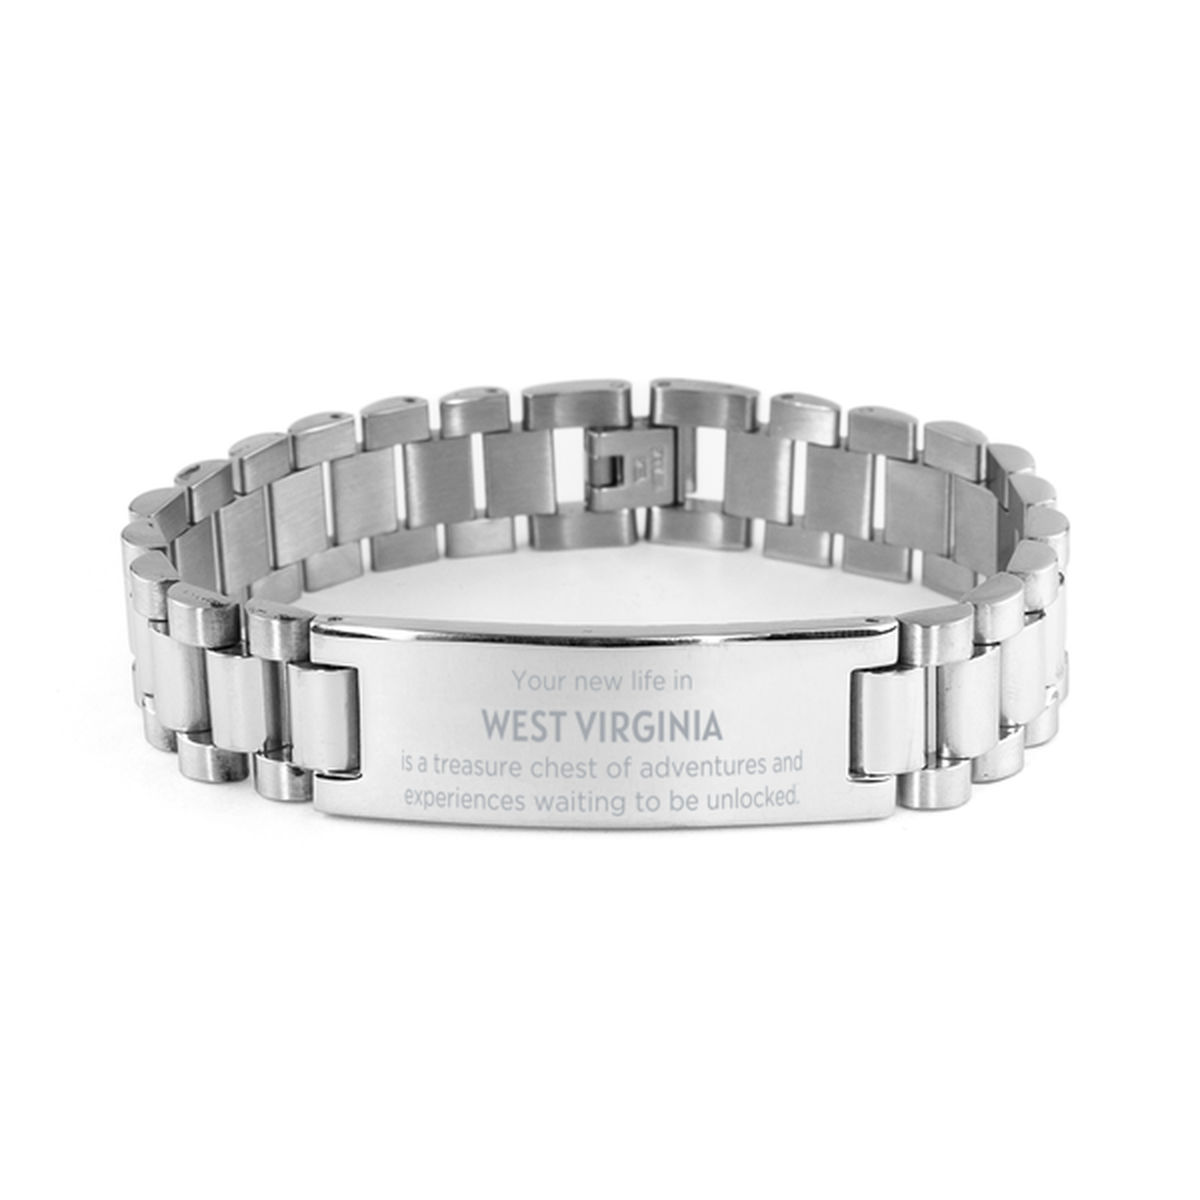 Moving to West Virginia Gifts, Your new life in West Virginia, Long Distance West Virginia Christmas Ladder Stainless Steel Bracelet For Men, Women, Friends, Coworkers